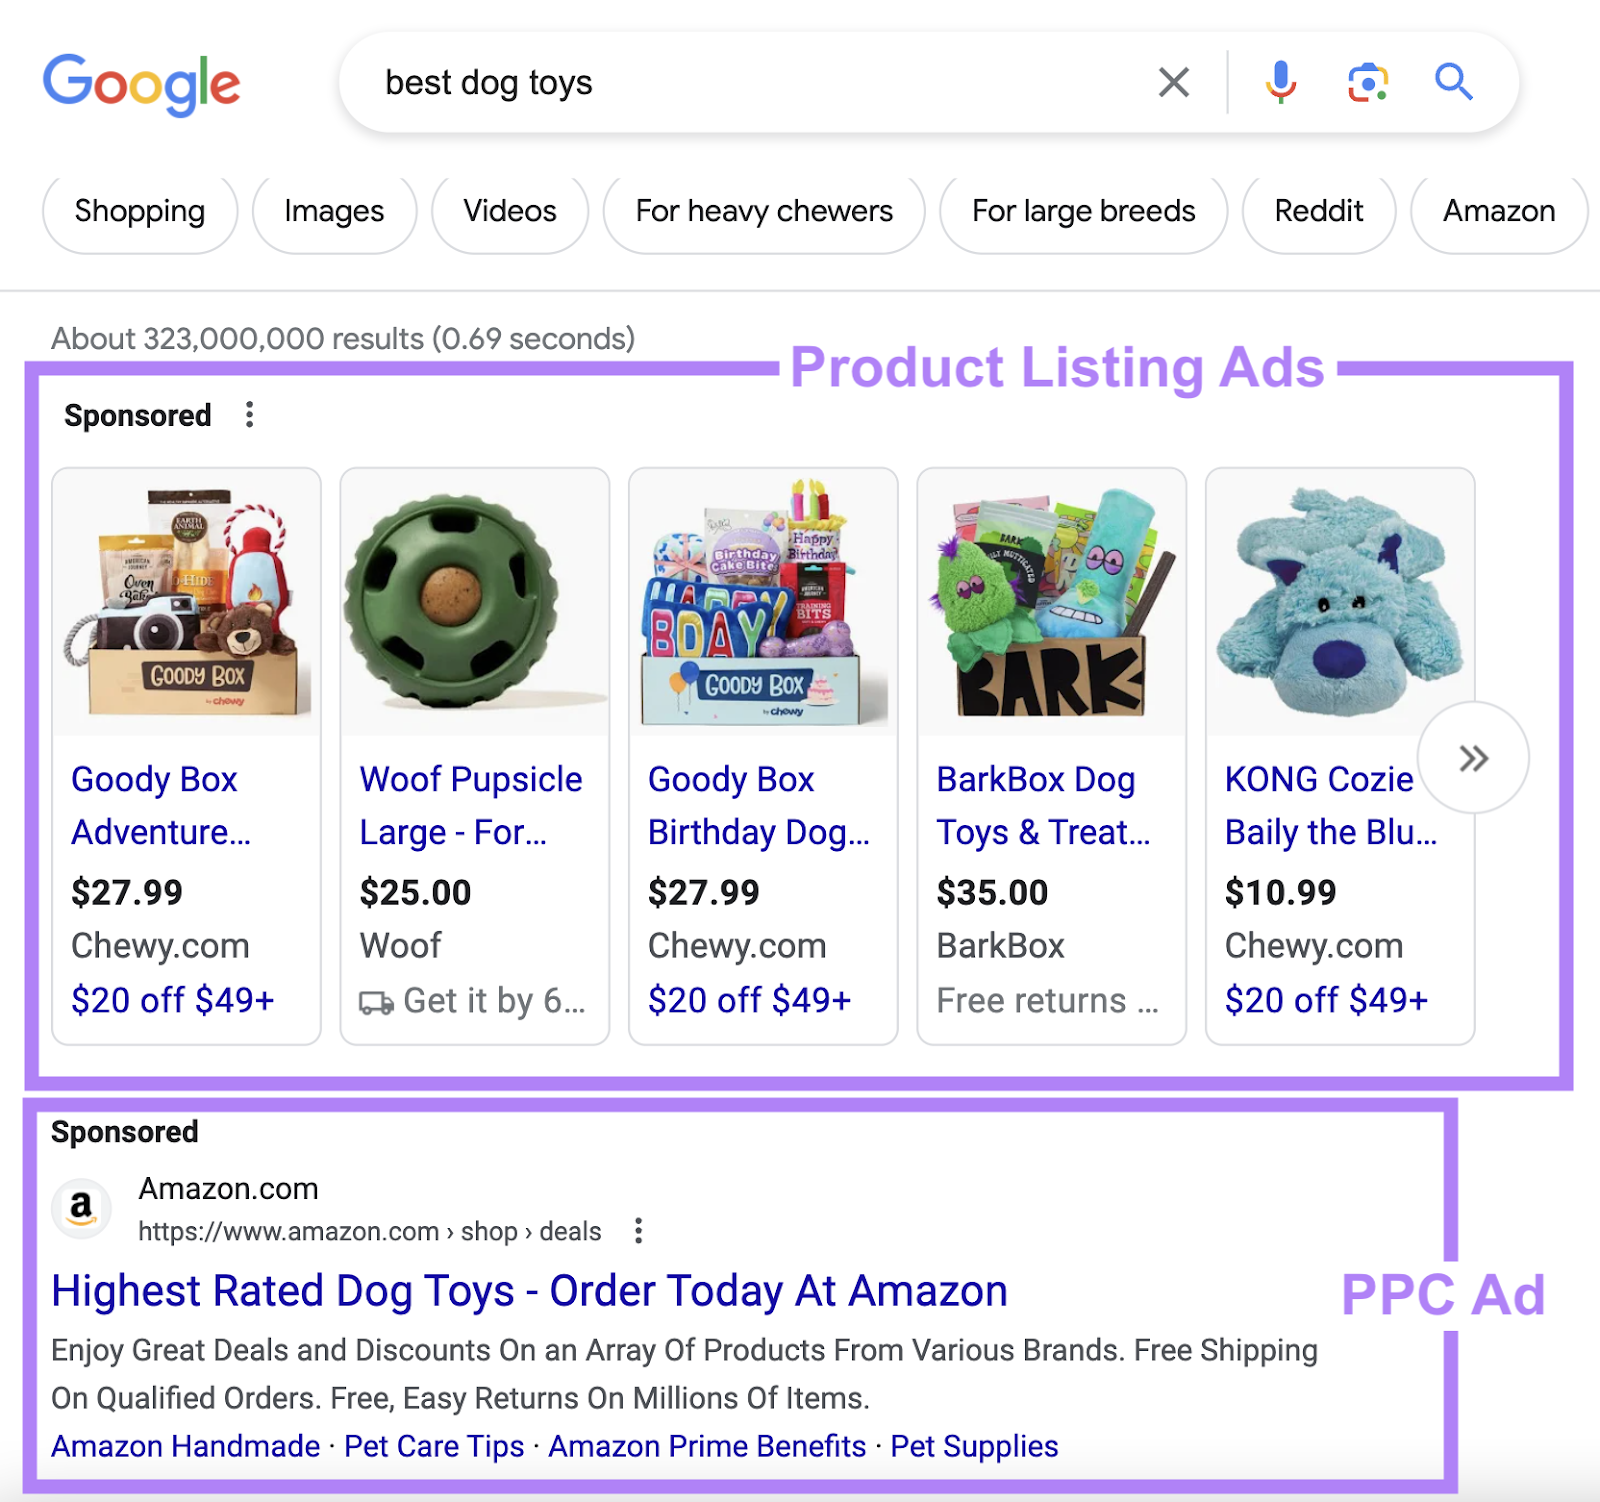 example of product listing ads and PPC ad shown in Google search